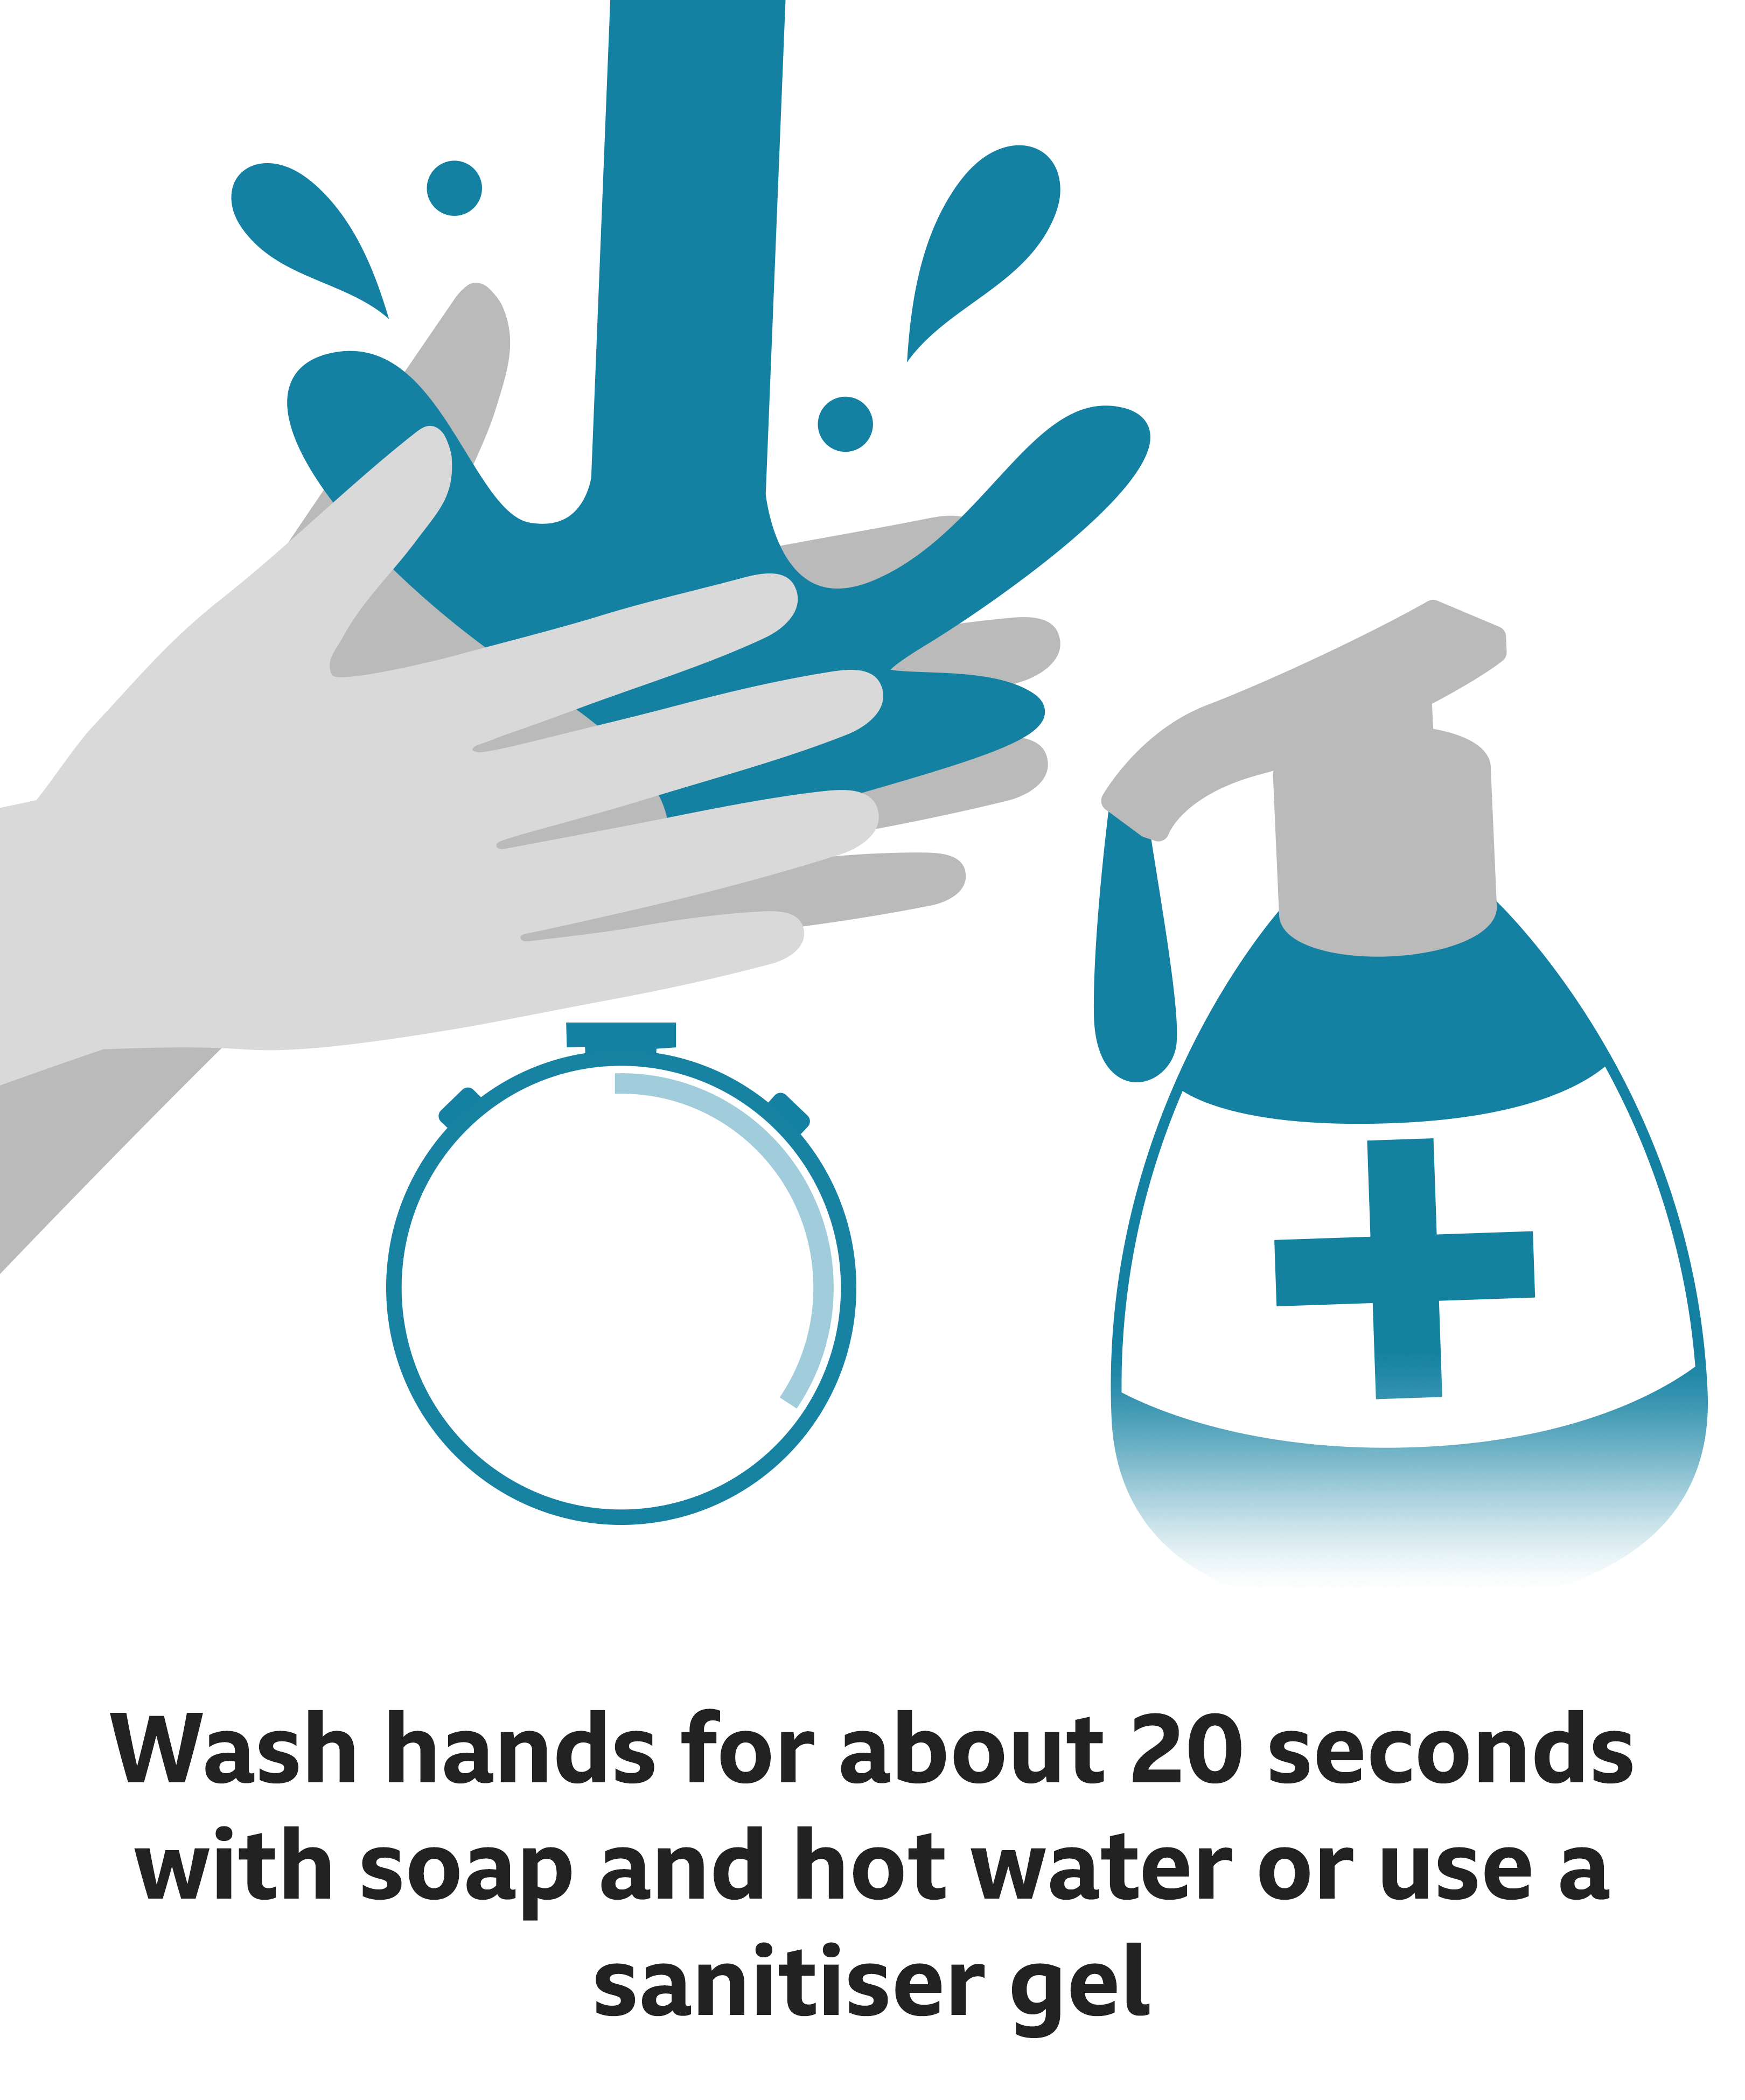 Text reads: Wash hands for about 20 seconds with soap and hot water or use a sanitiser gel